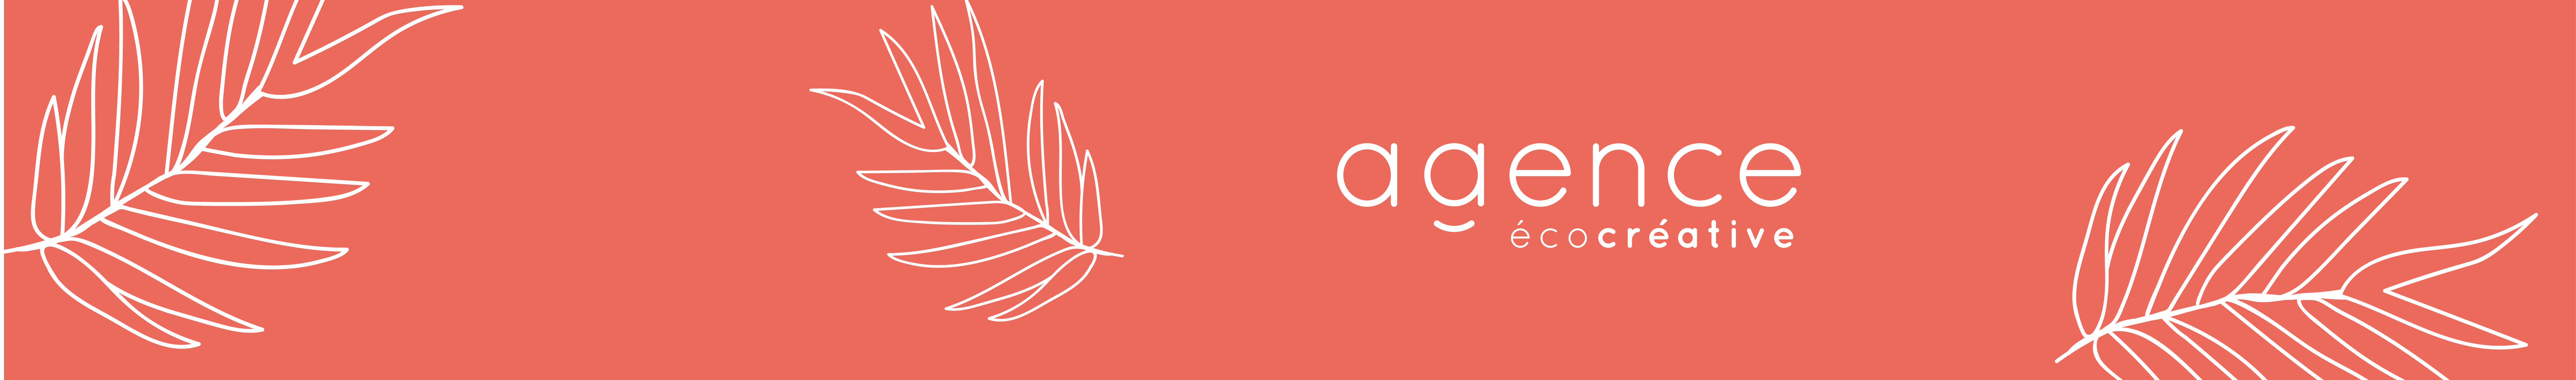 Agence G's profile banner